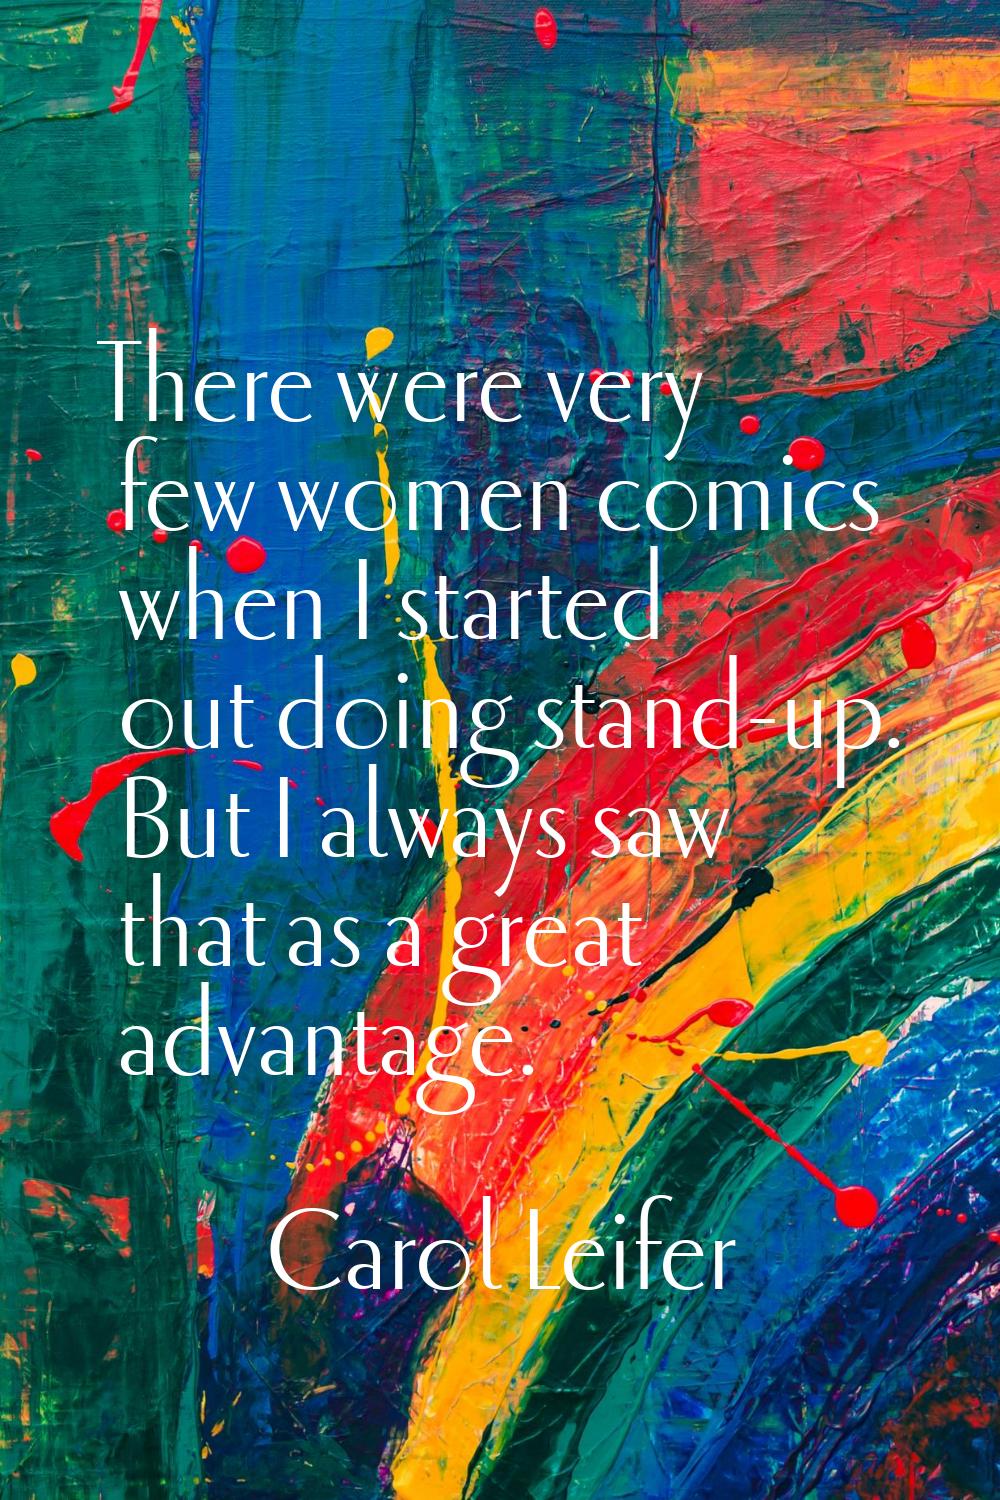 There were very few women comics when I started out doing stand-up. But I always saw that as a grea